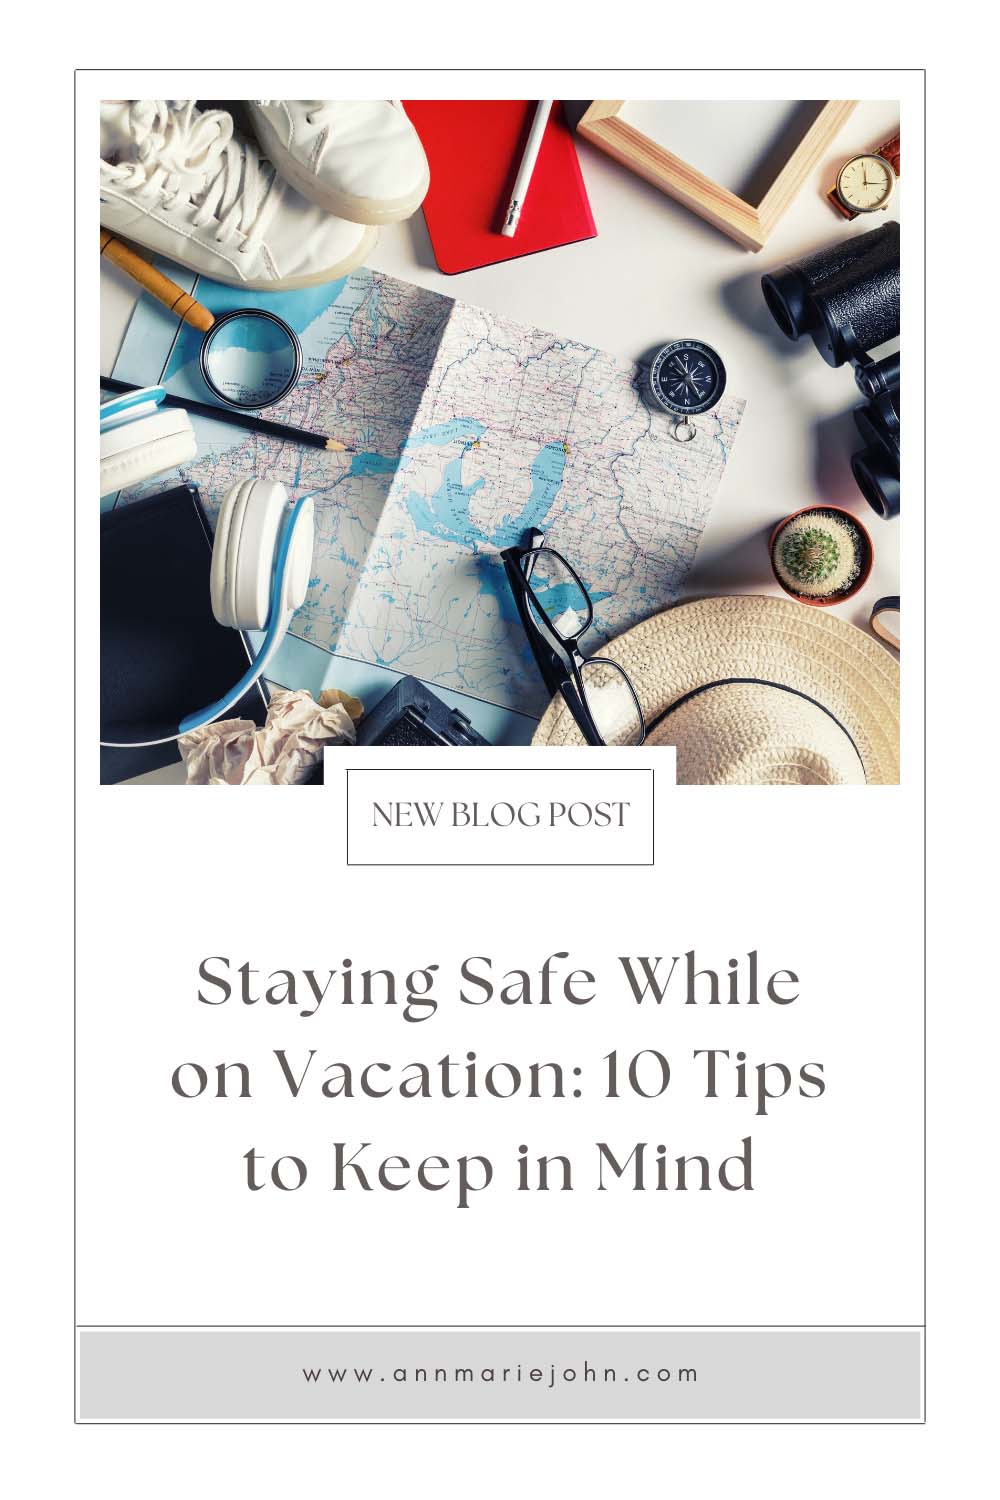 Staying Safe While on Vacation: 10 Tips to Keep in Mind